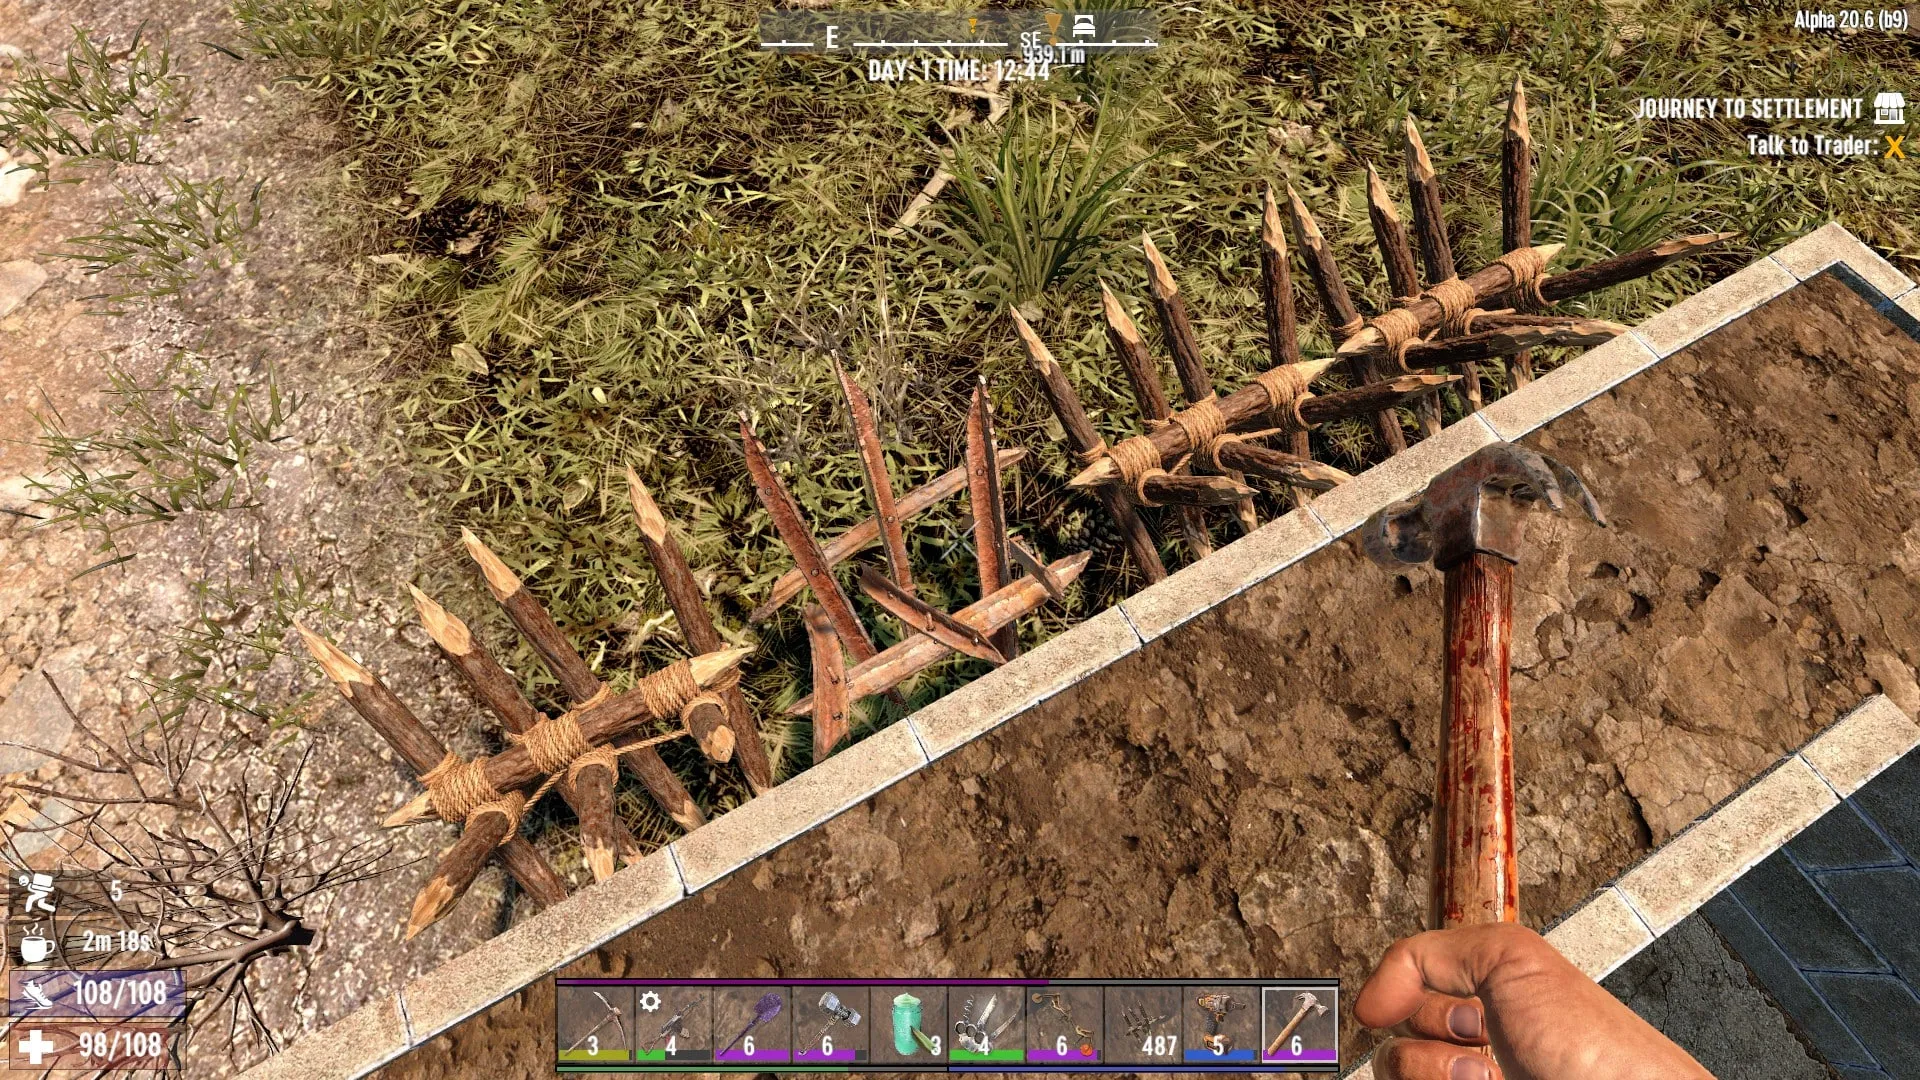 A Deployed Spike Trap in 7 Days to Die